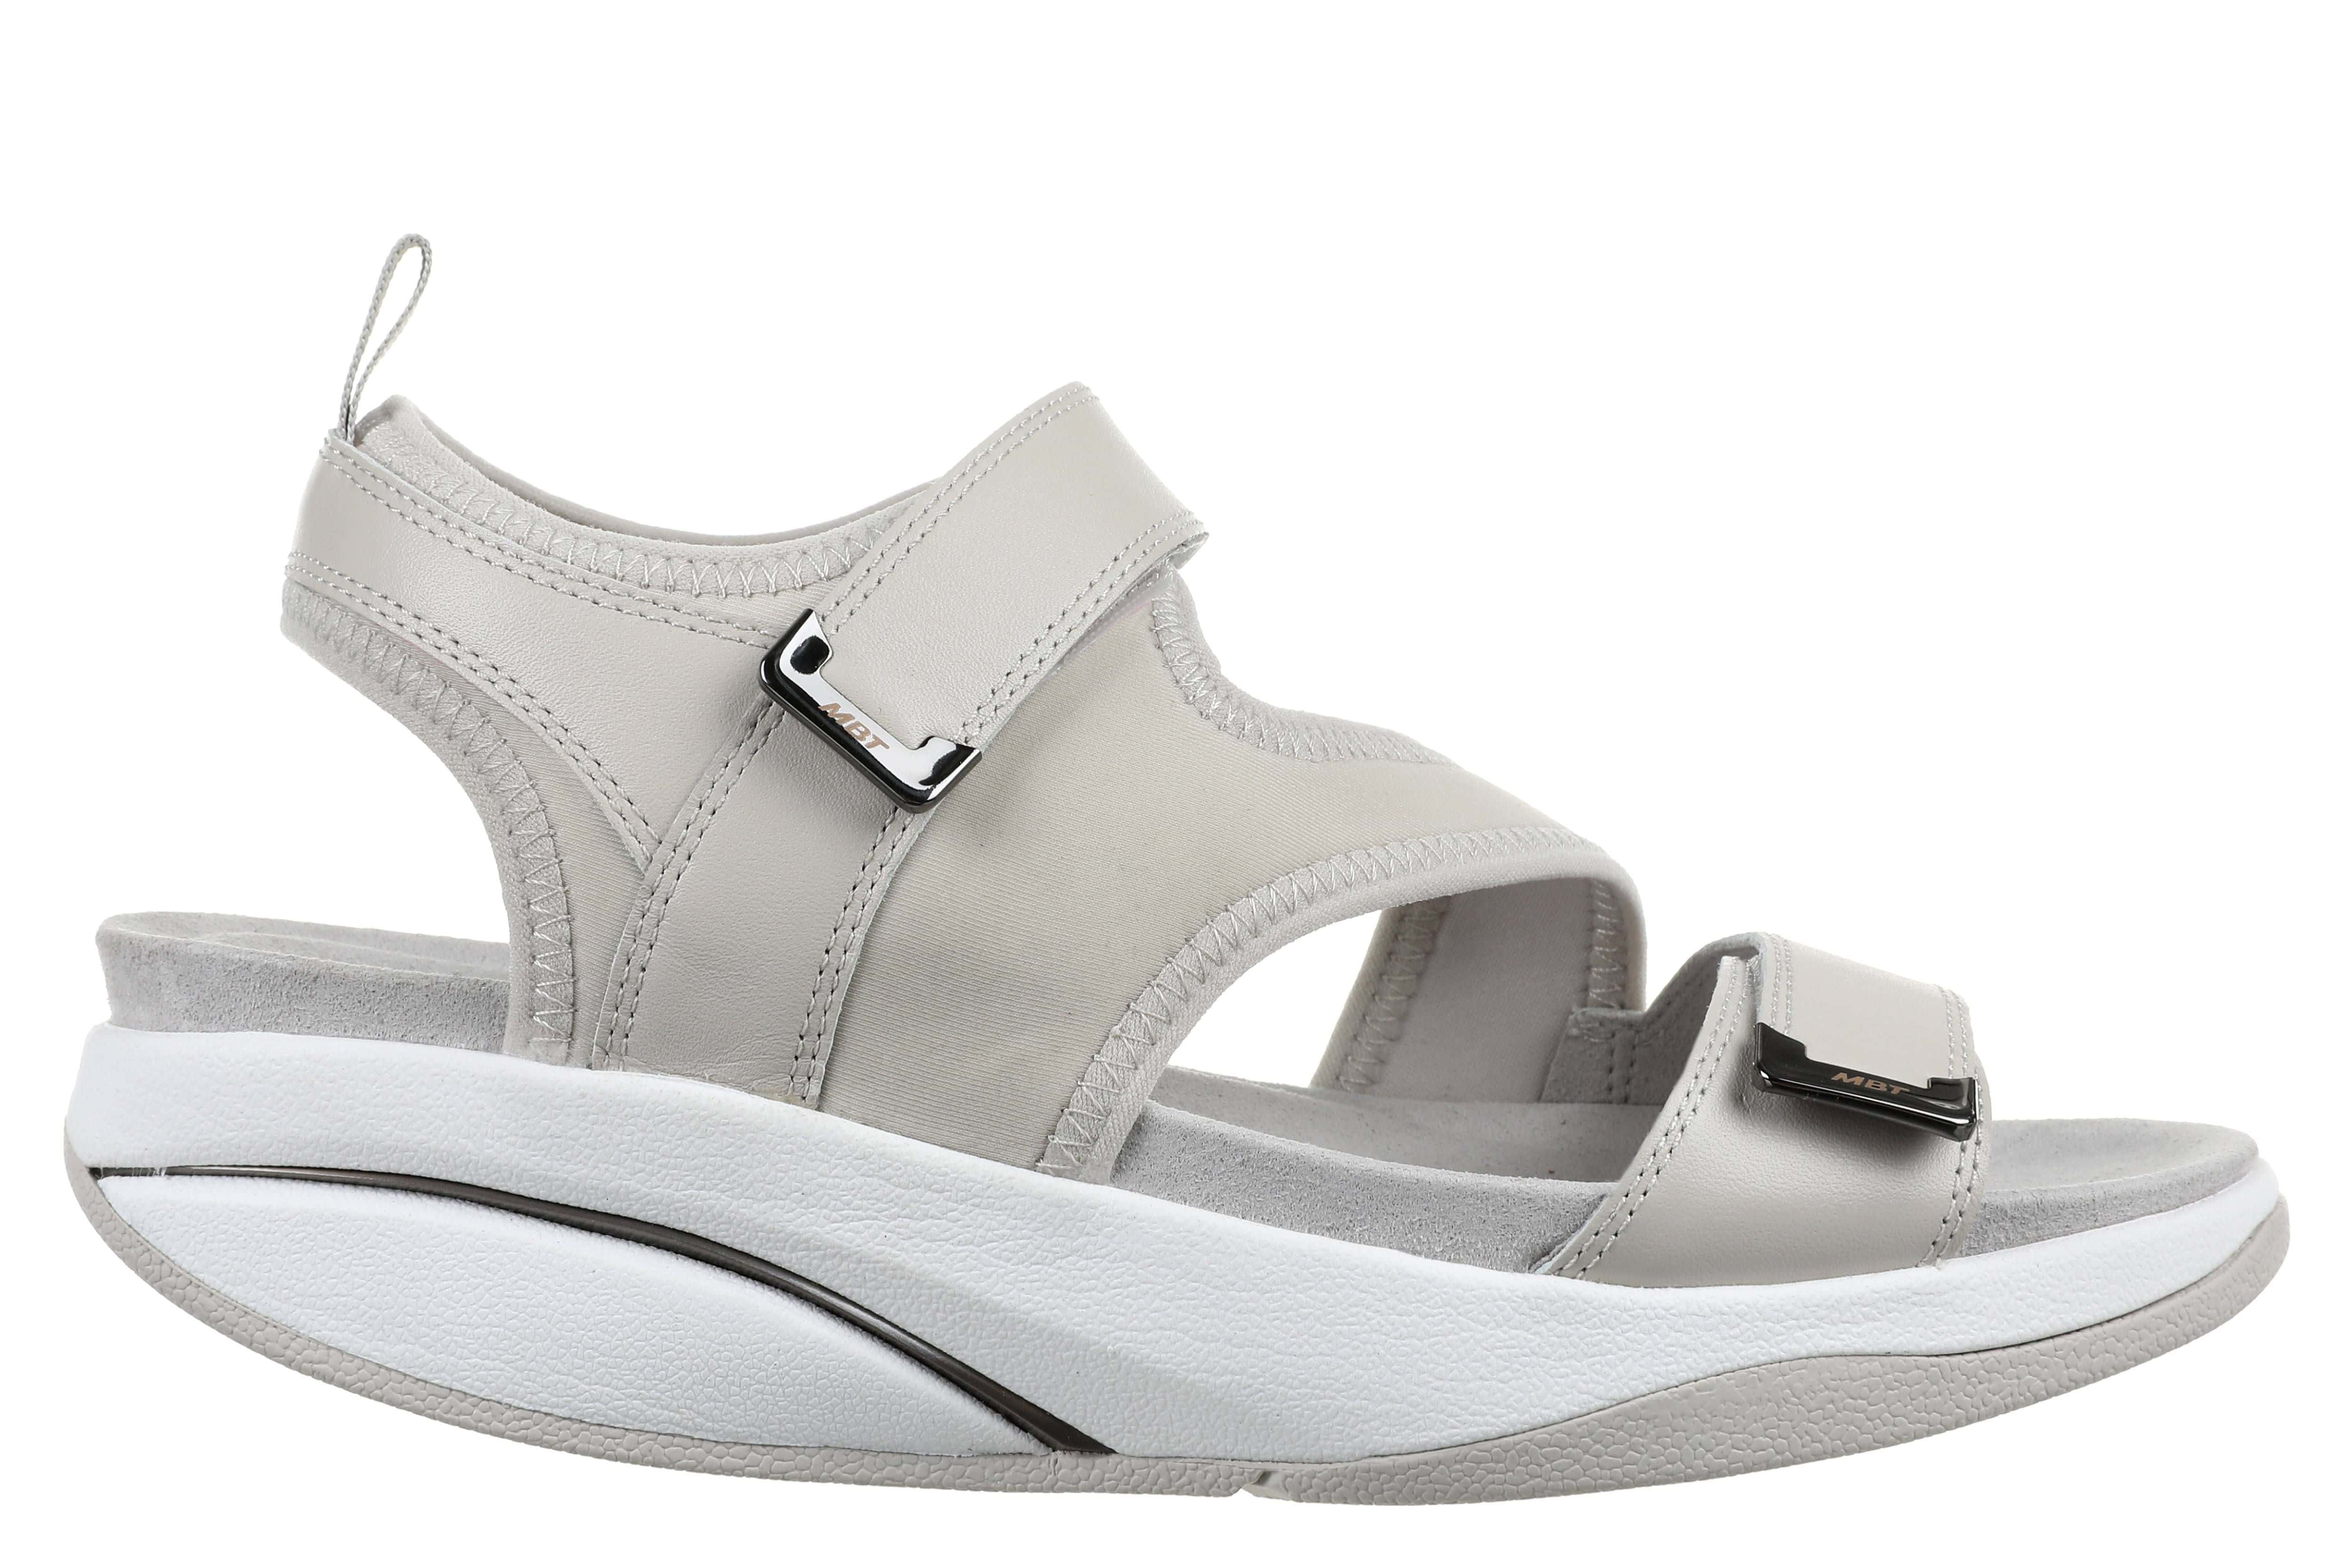 MBT WOMEN´S SANDALS AZA W TAUPE